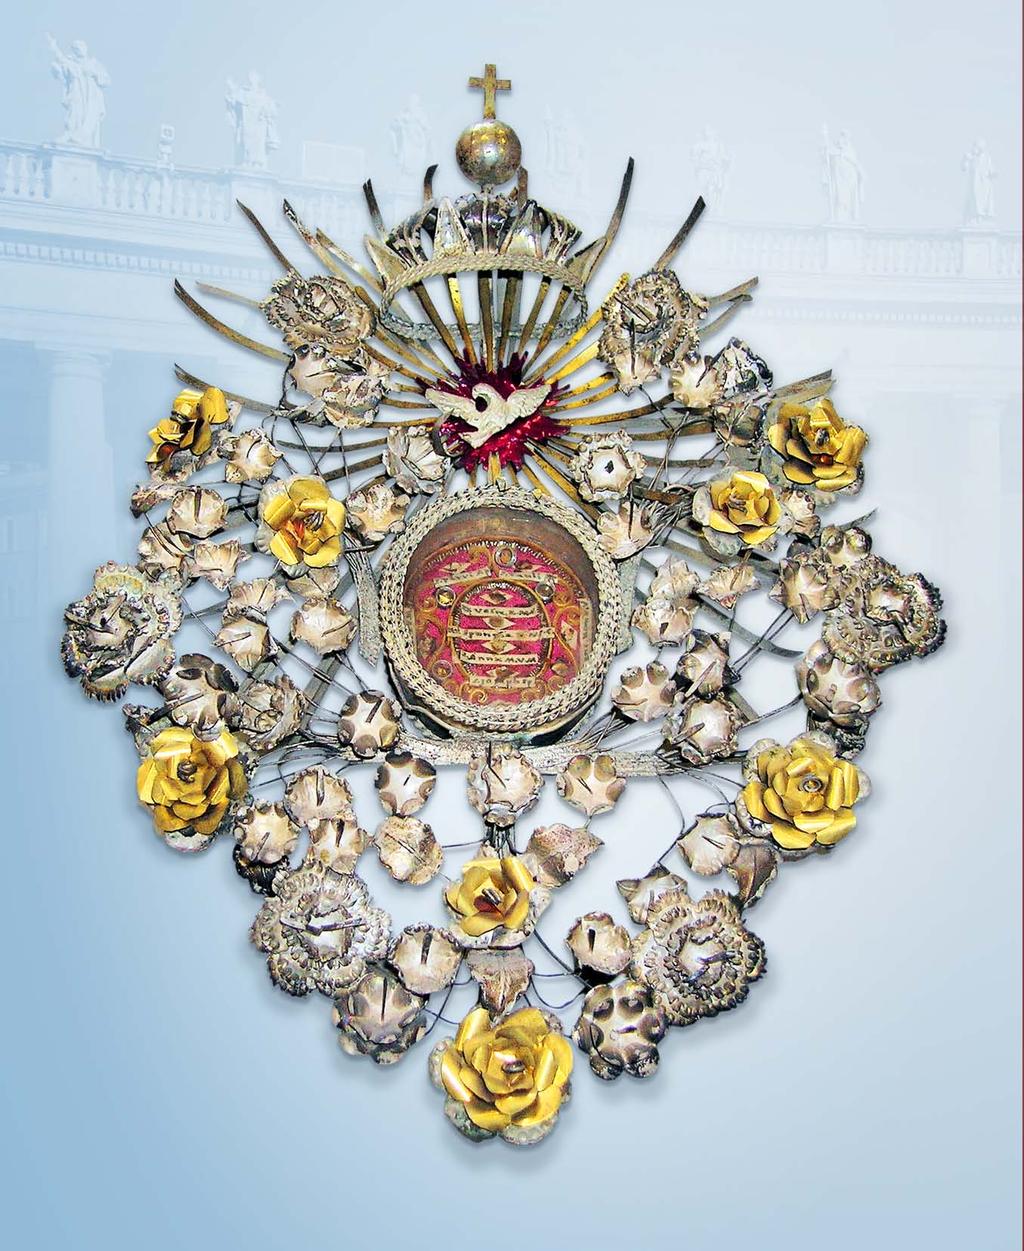 President s Message This gold and silver reliquary contains bones that for centuries have been believed to belong to Saint Peter, Saint Paul, and possibly other saints including Anne and